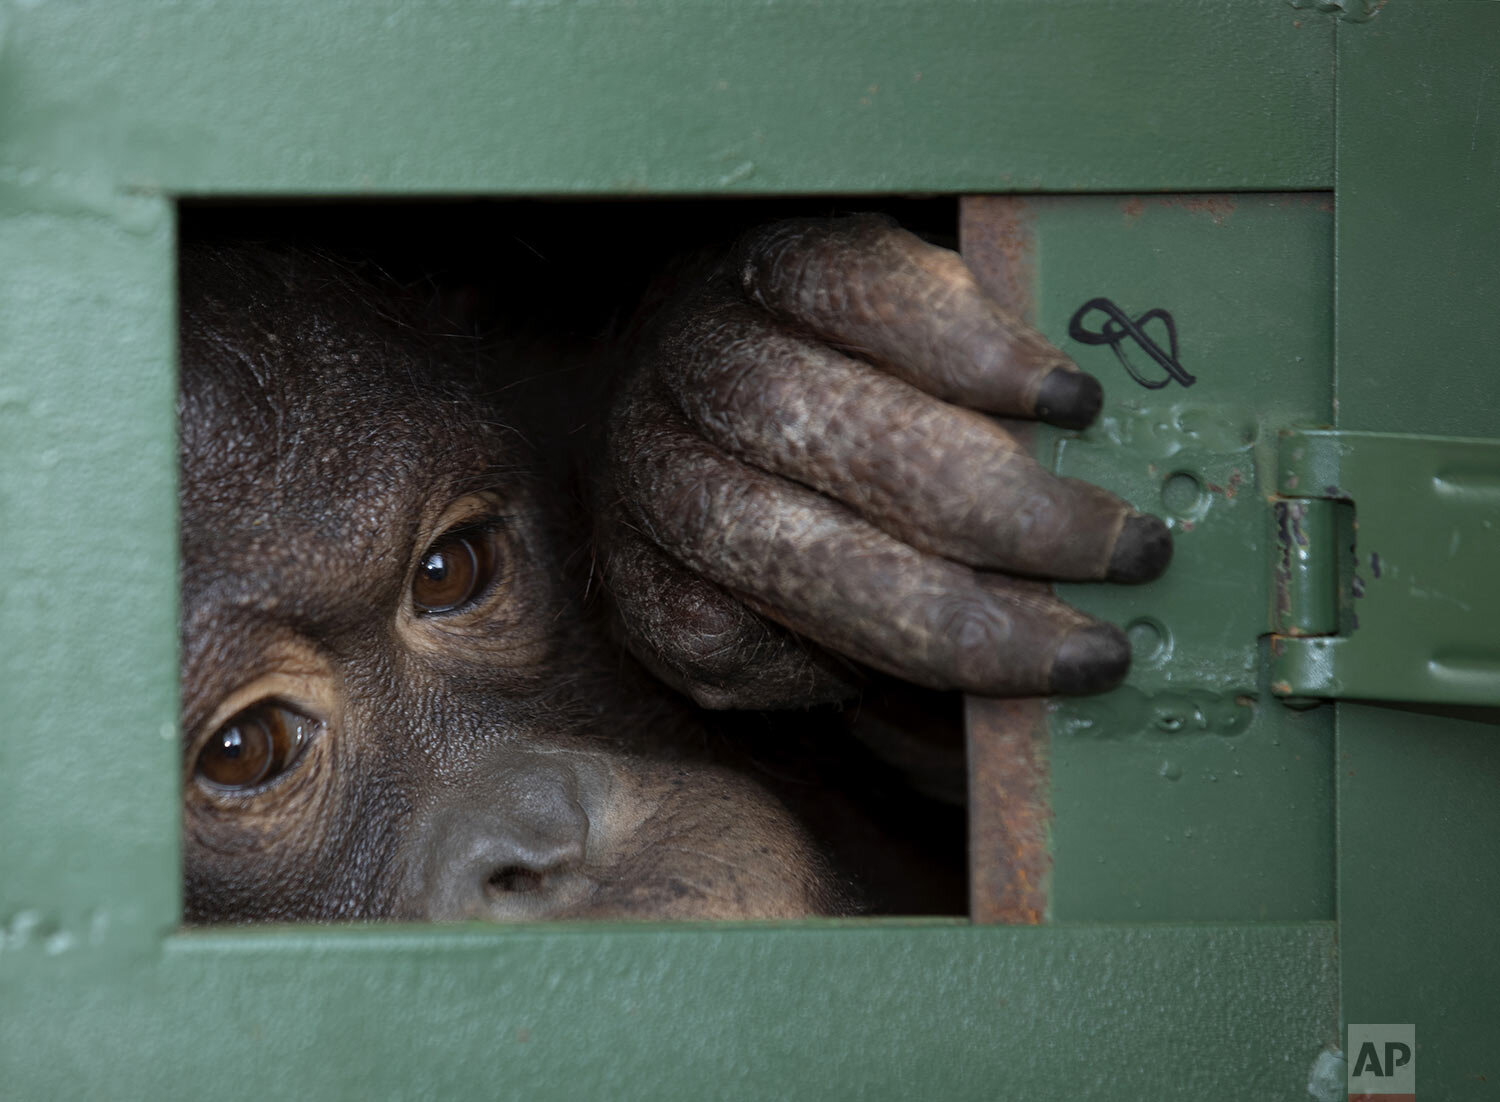  Cola, a 10-year-old female orangutan, waits in a cage to be sent back to Indonesia at a Suvarnabhumi Airport in Bangkok, Thailand, Friday, Dec. 20, 2019. (AP Photo/Sakchai Lalit) 